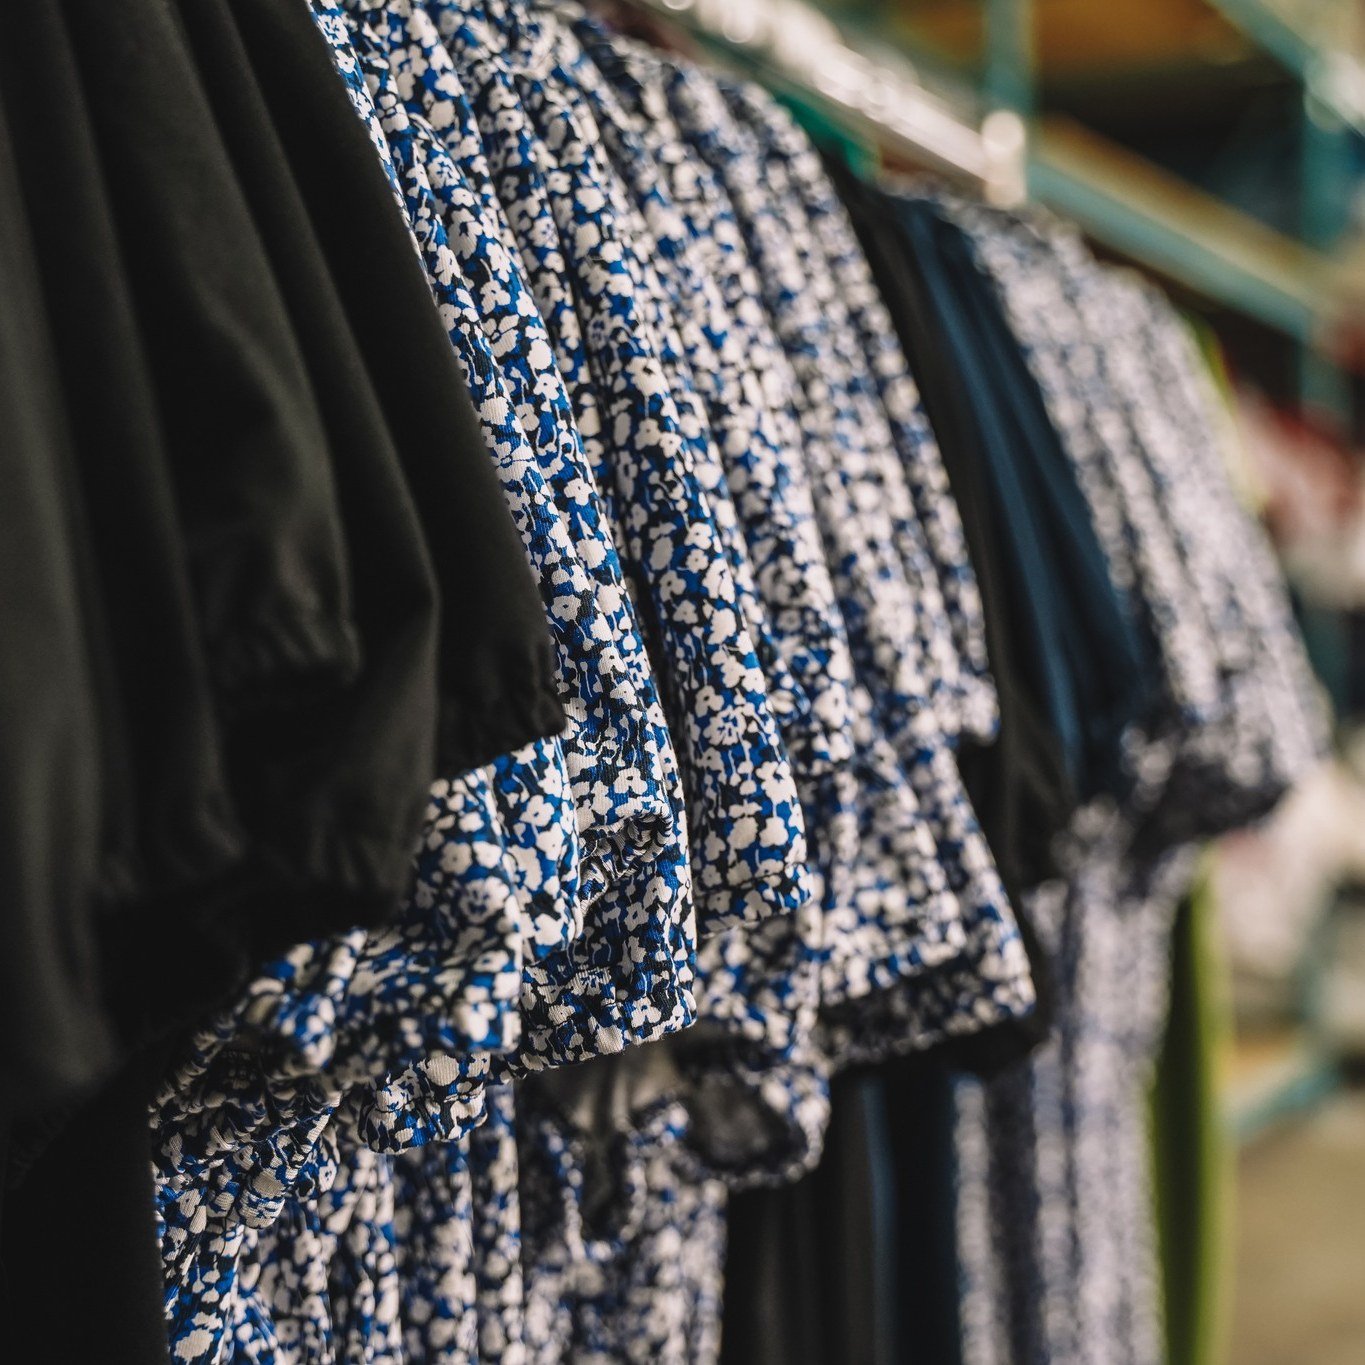 Nothing says spring like a floral print. 🌸The sewing room floor has been full of light and airy dresses these days which has us excited for the warmer weather!

🧵Learn more at crwdesign.ca
.
.
.
#CRWDesign #CanadianFashion #SustainableStyle #Ethica